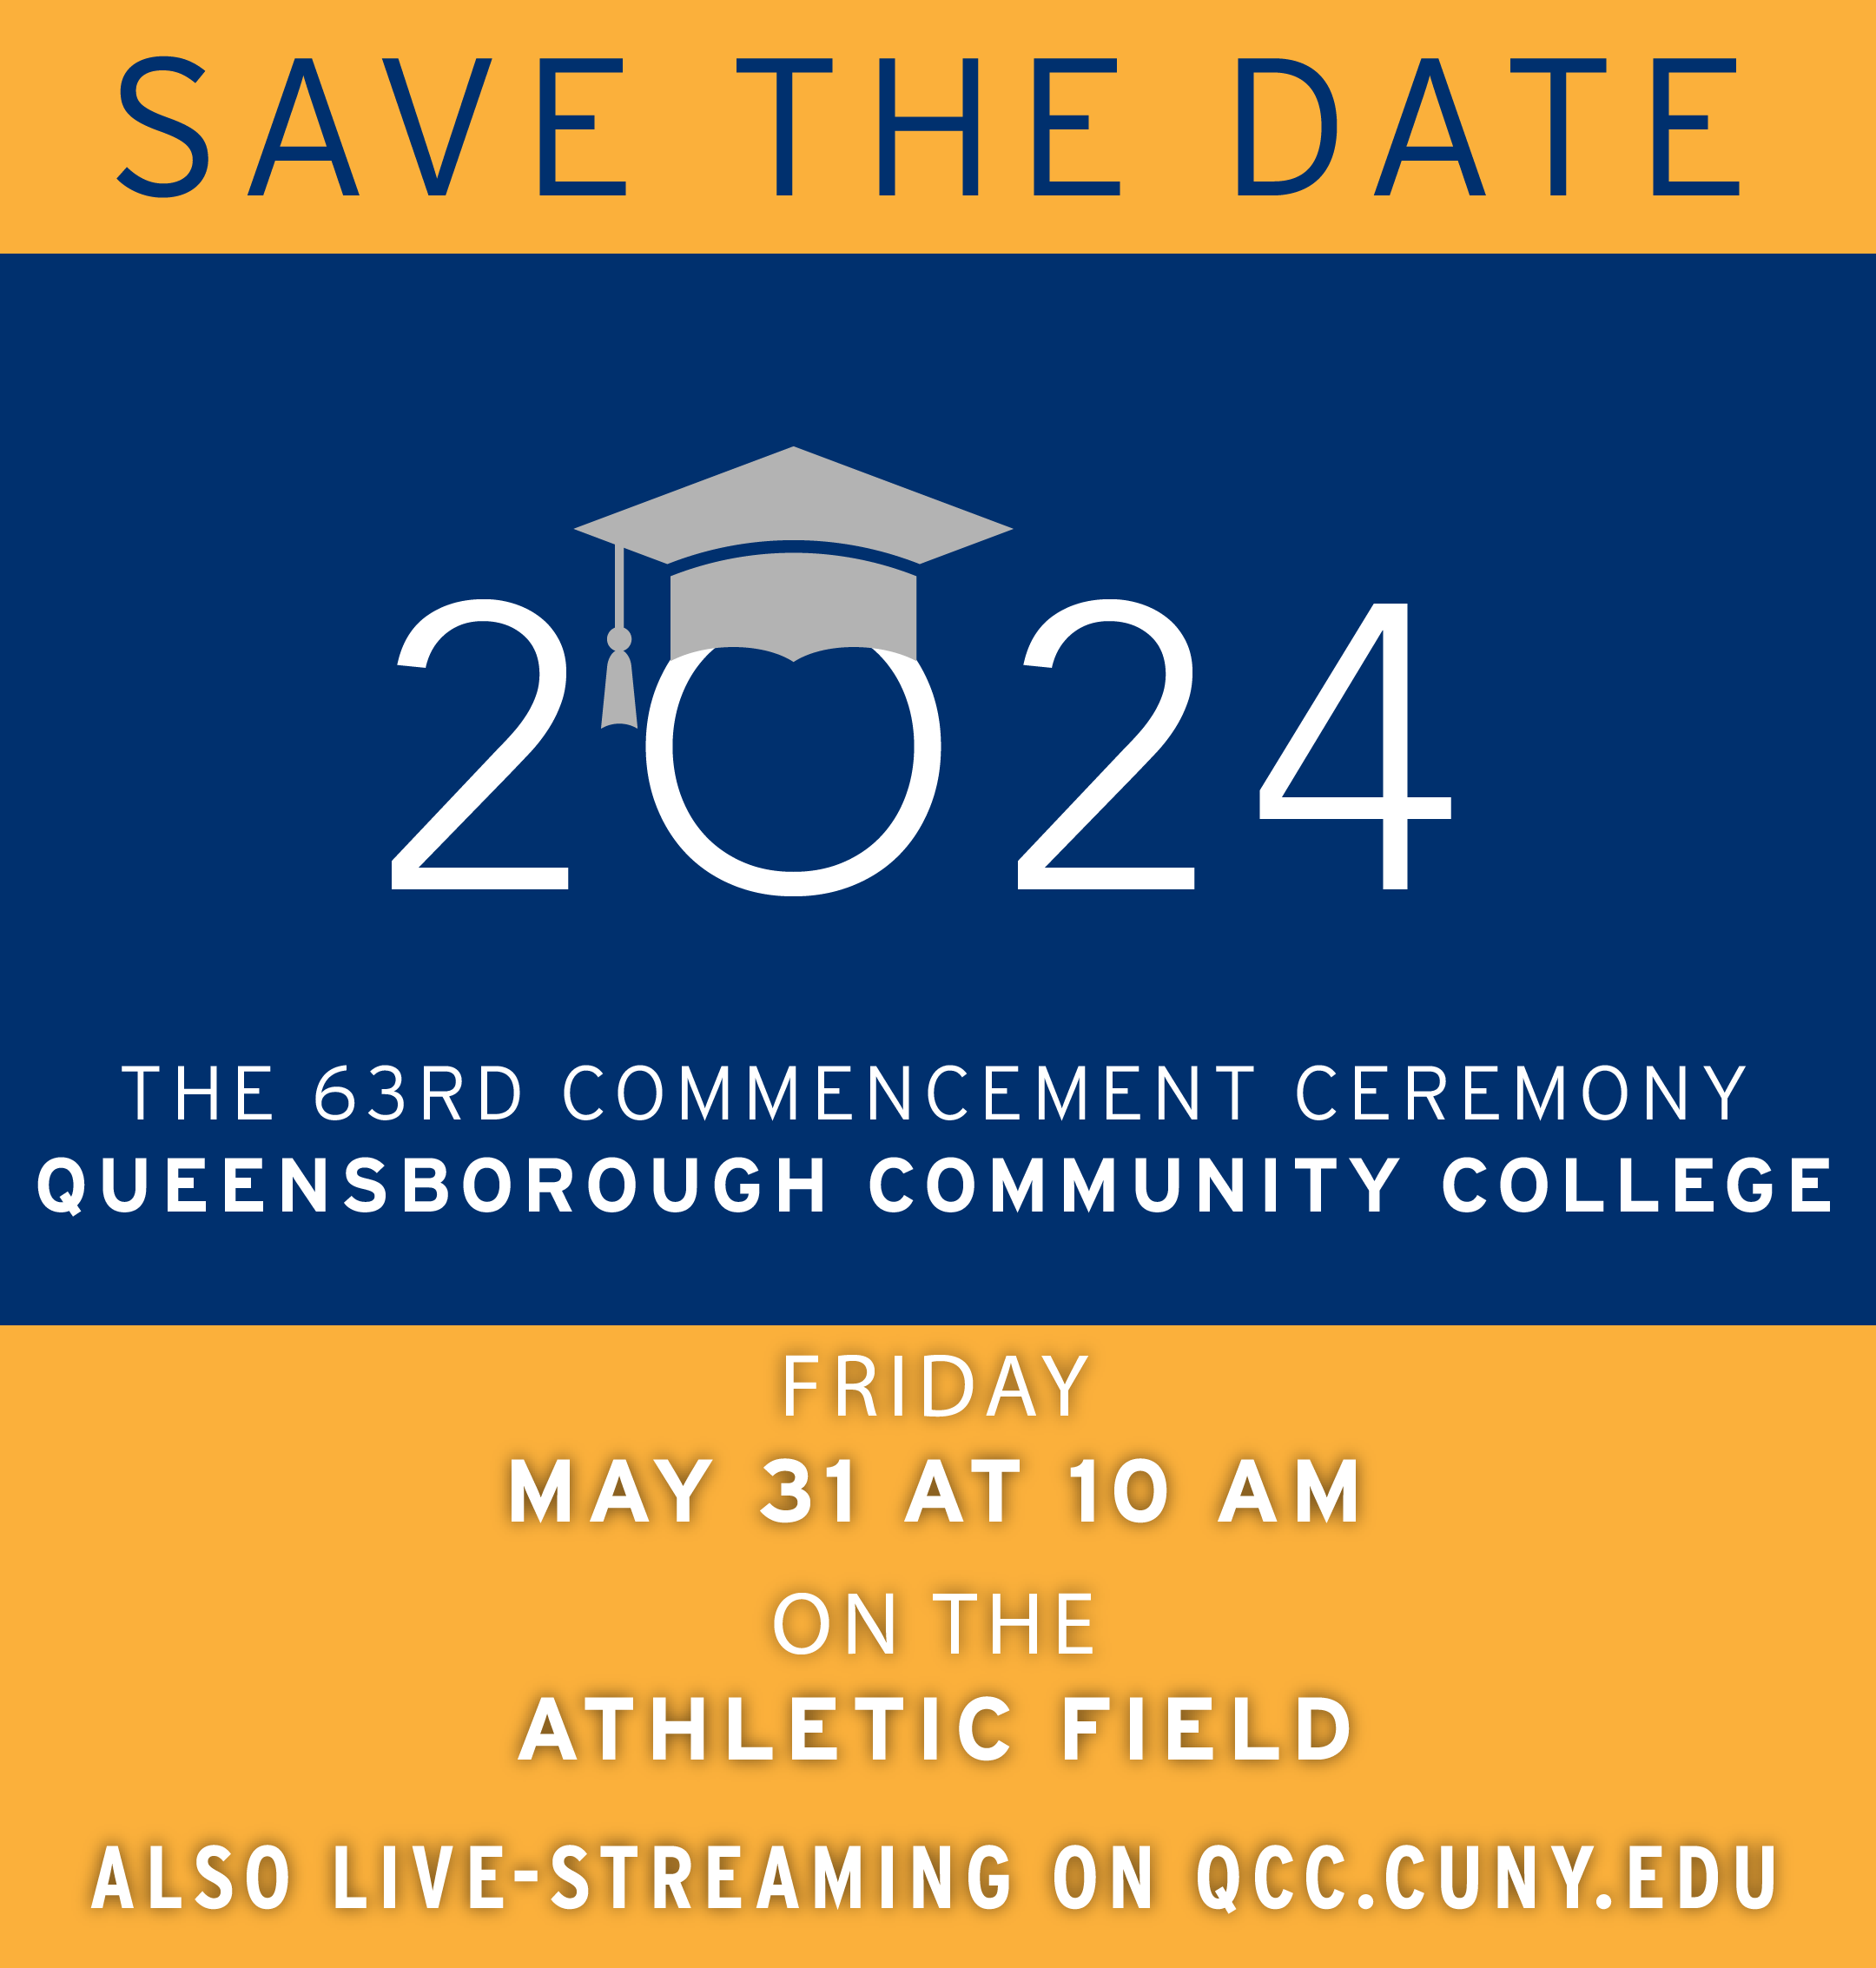 Commencement 2024 save the date. Commencement will be held on Friday, May 31, 2024 at 10 am